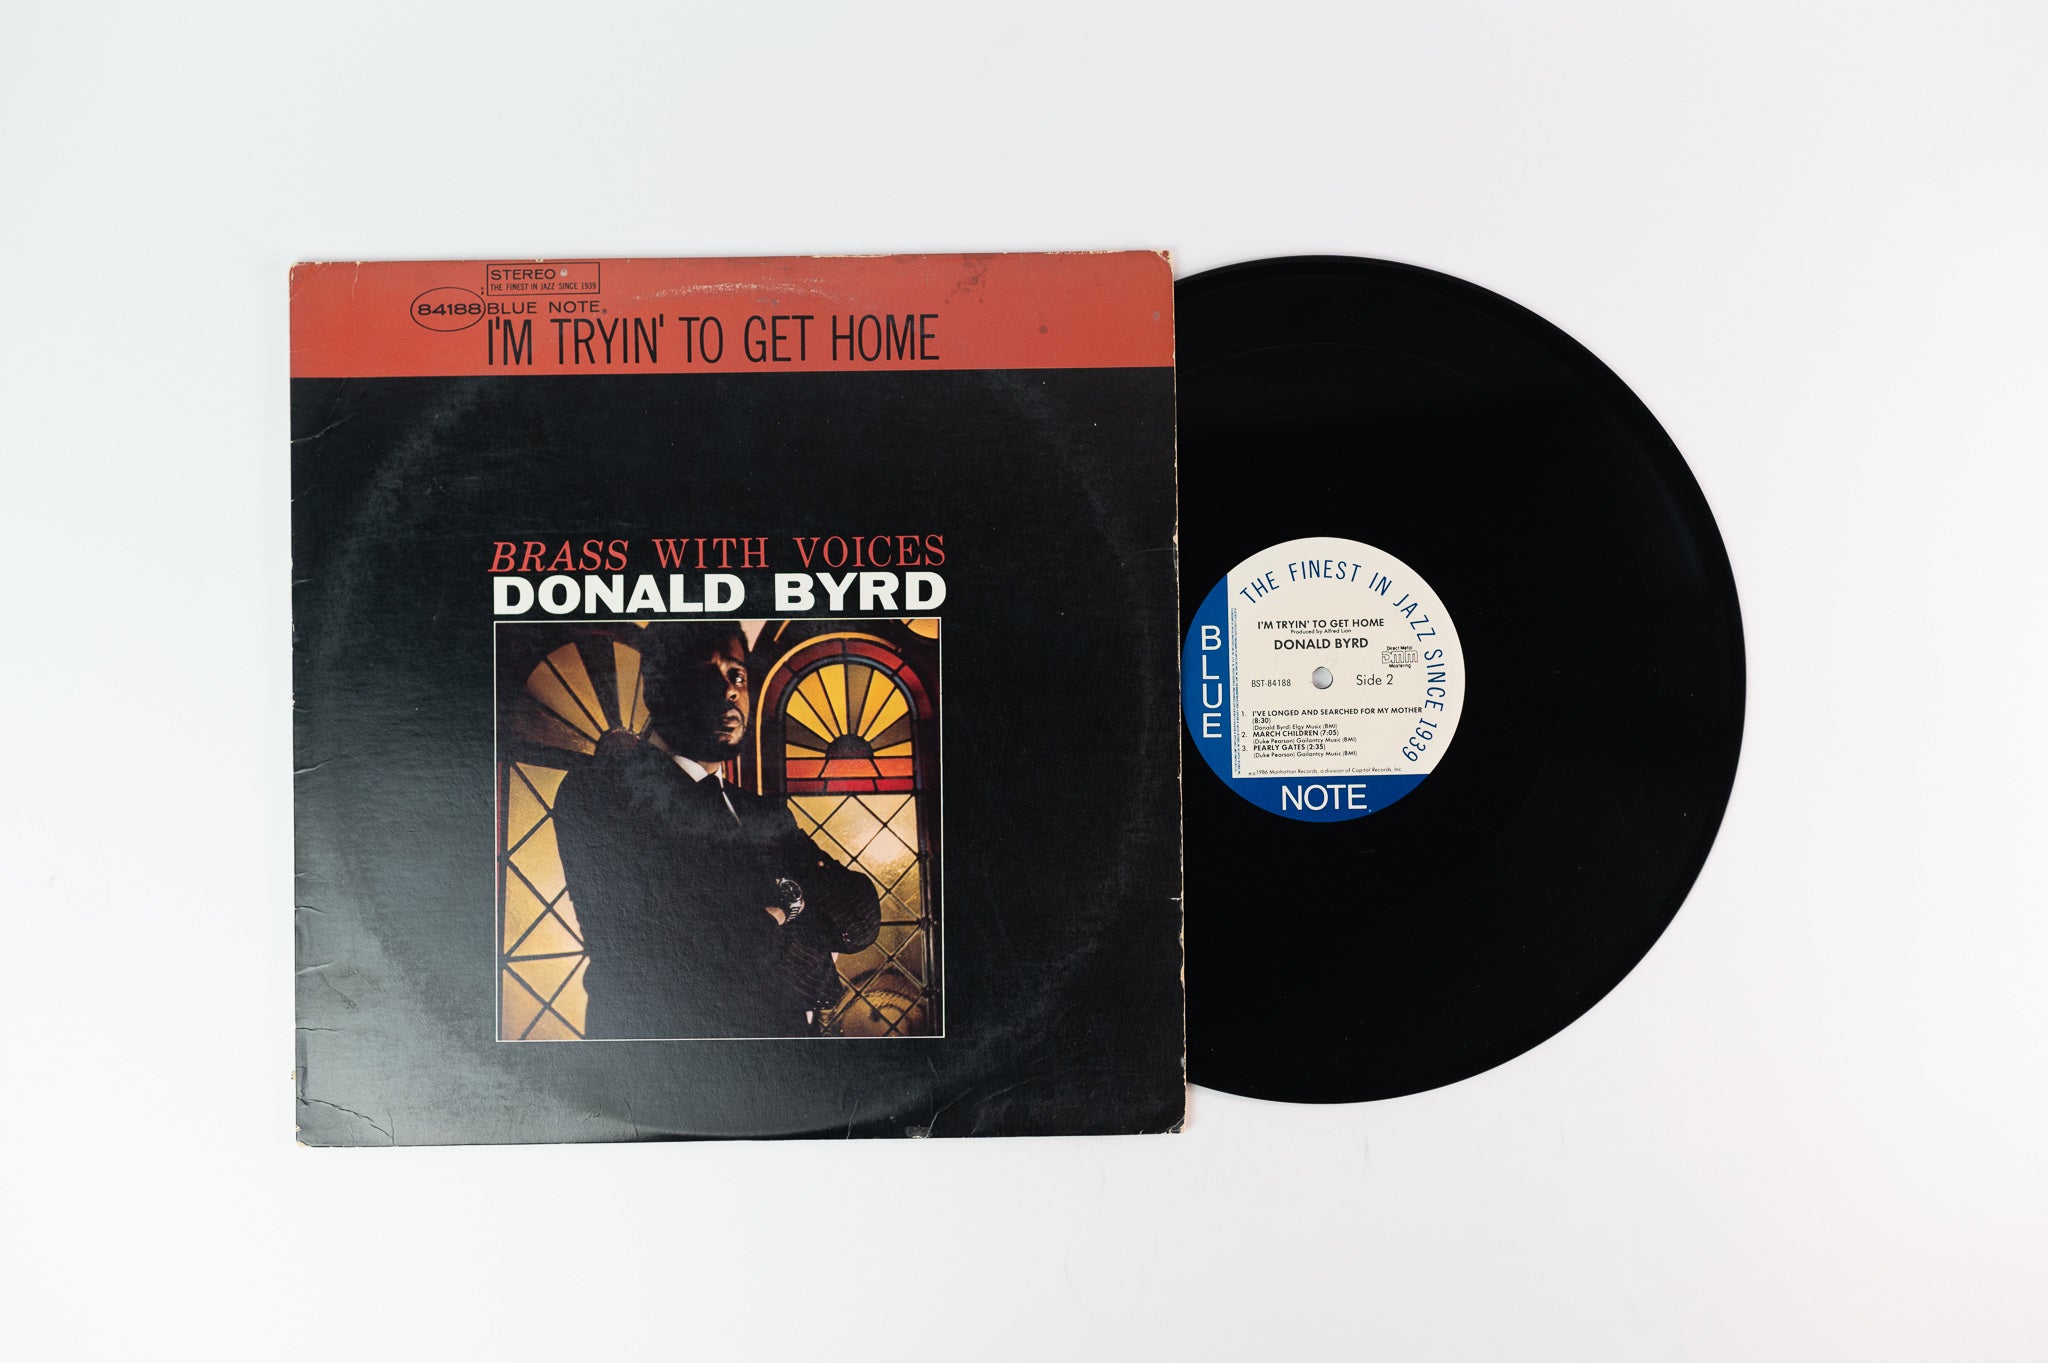 Donald Byrd - I'm Tryin' To Get Home (Brass With Voices) on Blue Note BST 84199 DMM Reissue